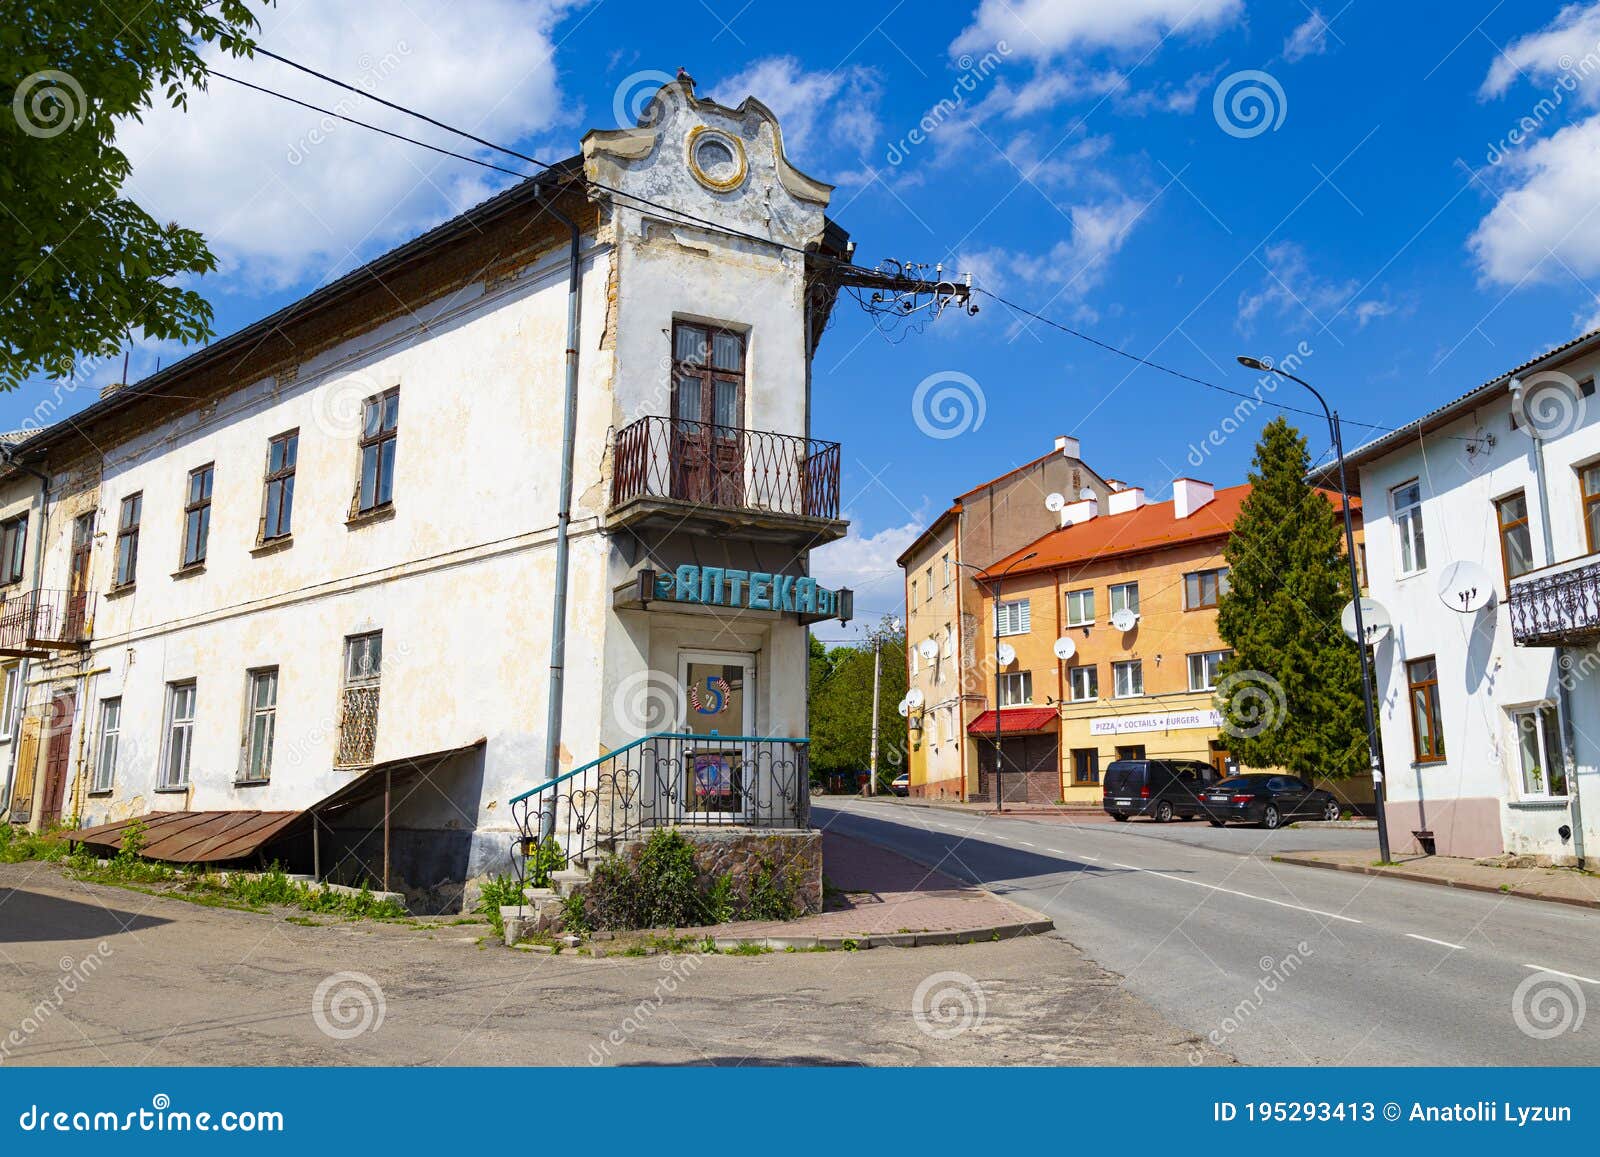 Small Old Busk Town, Western Ukraine Editorial Stock Photo - Image of ...